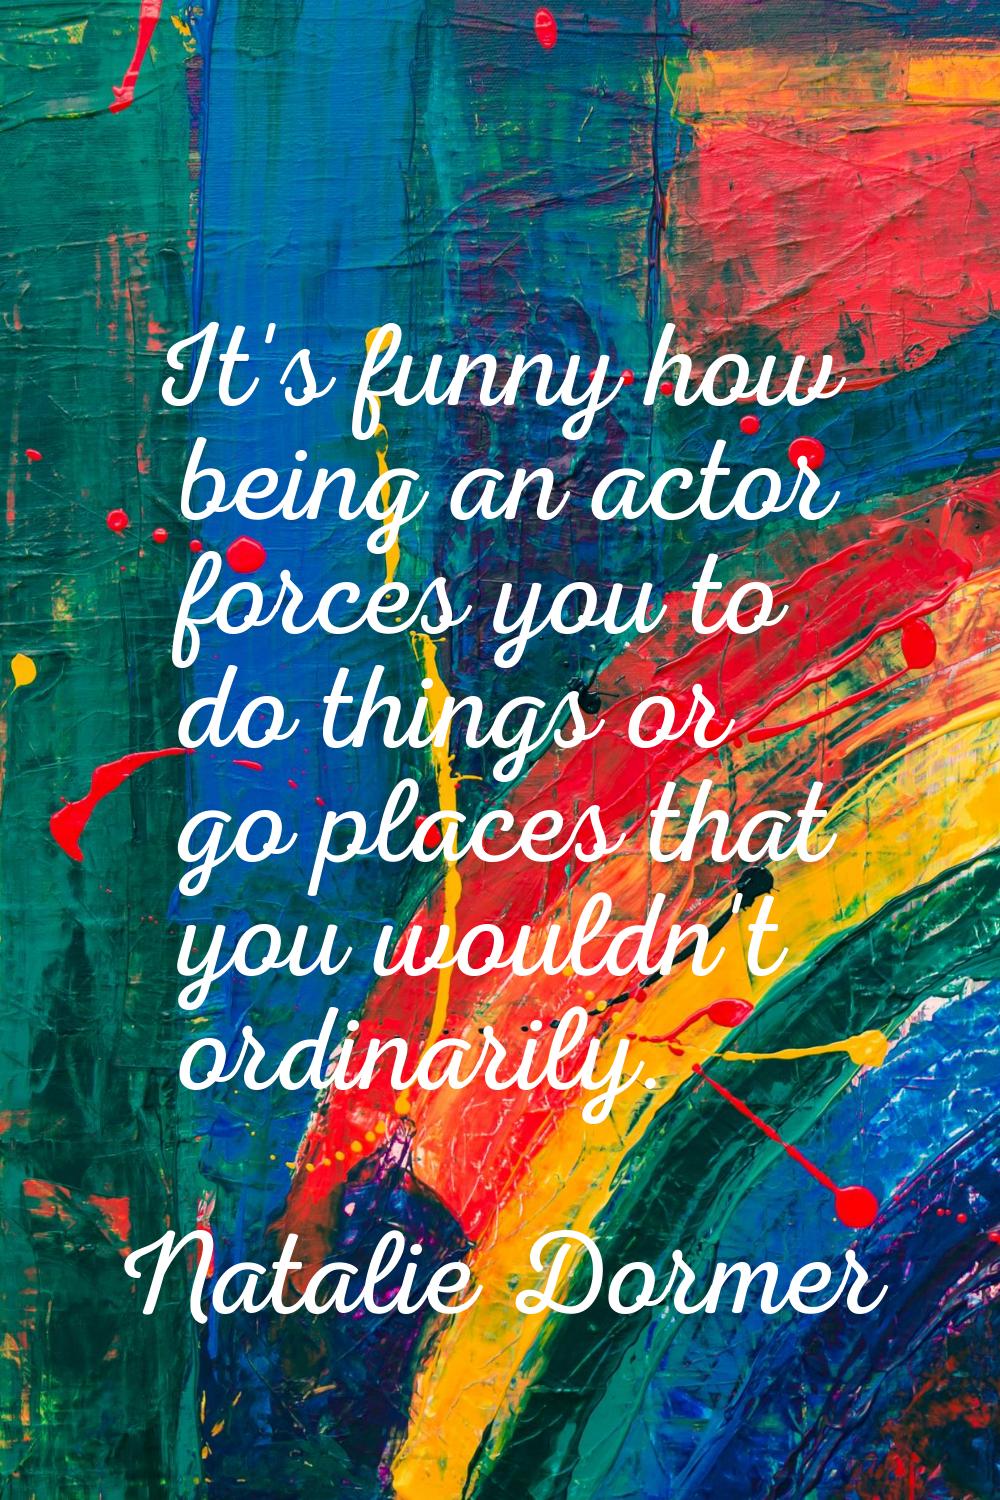 It's funny how being an actor forces you to do things or go places that you wouldn't ordinarily.